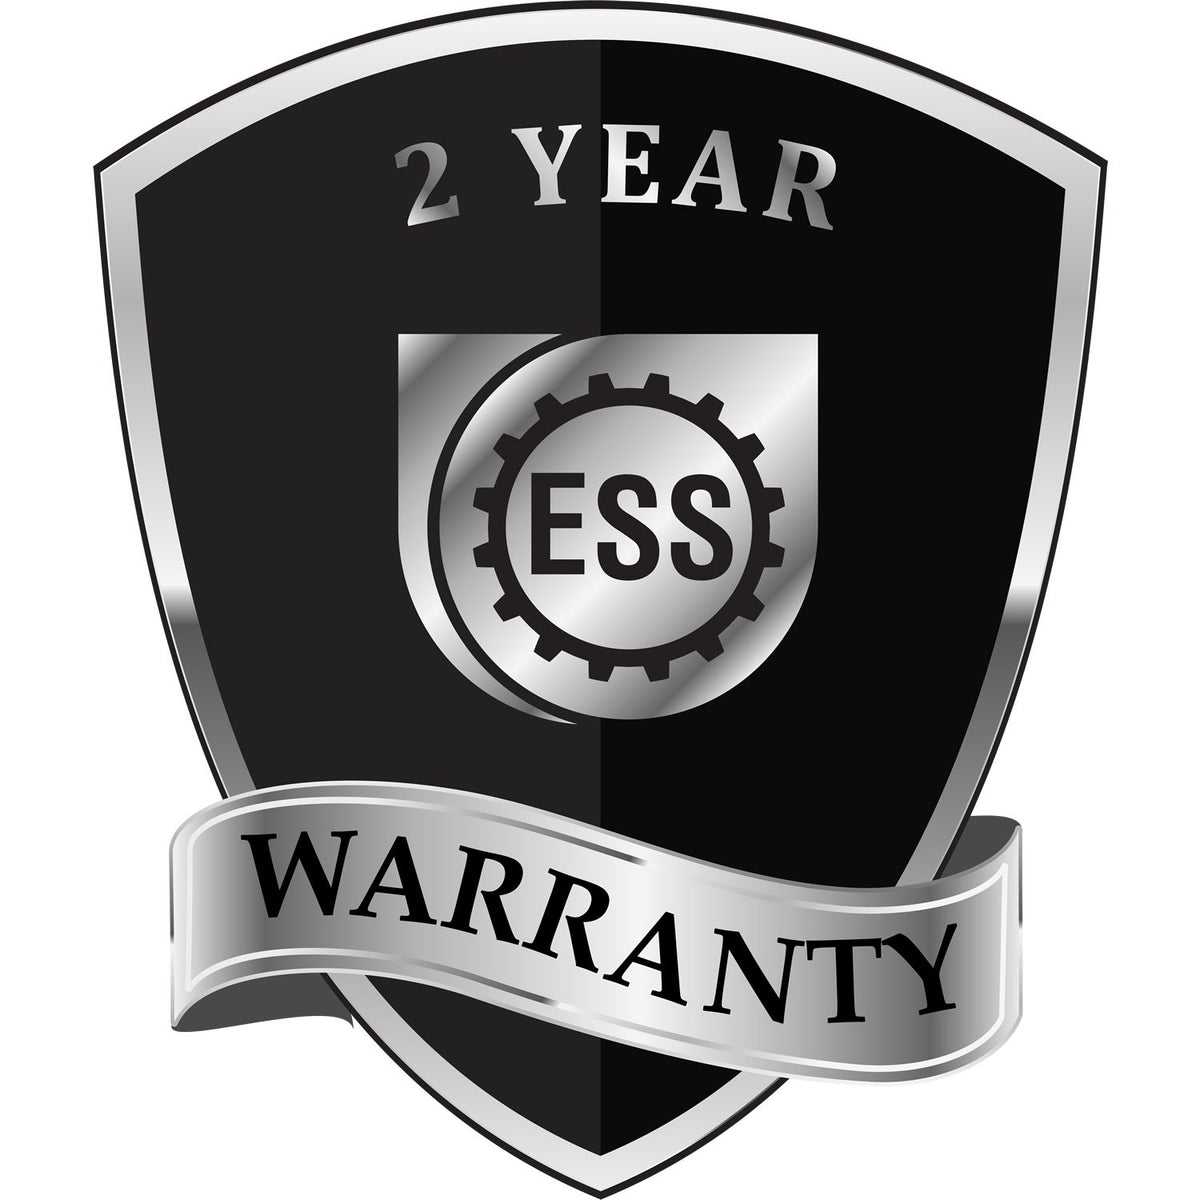 A black and silver badge or emblem showing warranty information for the Gift South Carolina Landscape Architect Seal